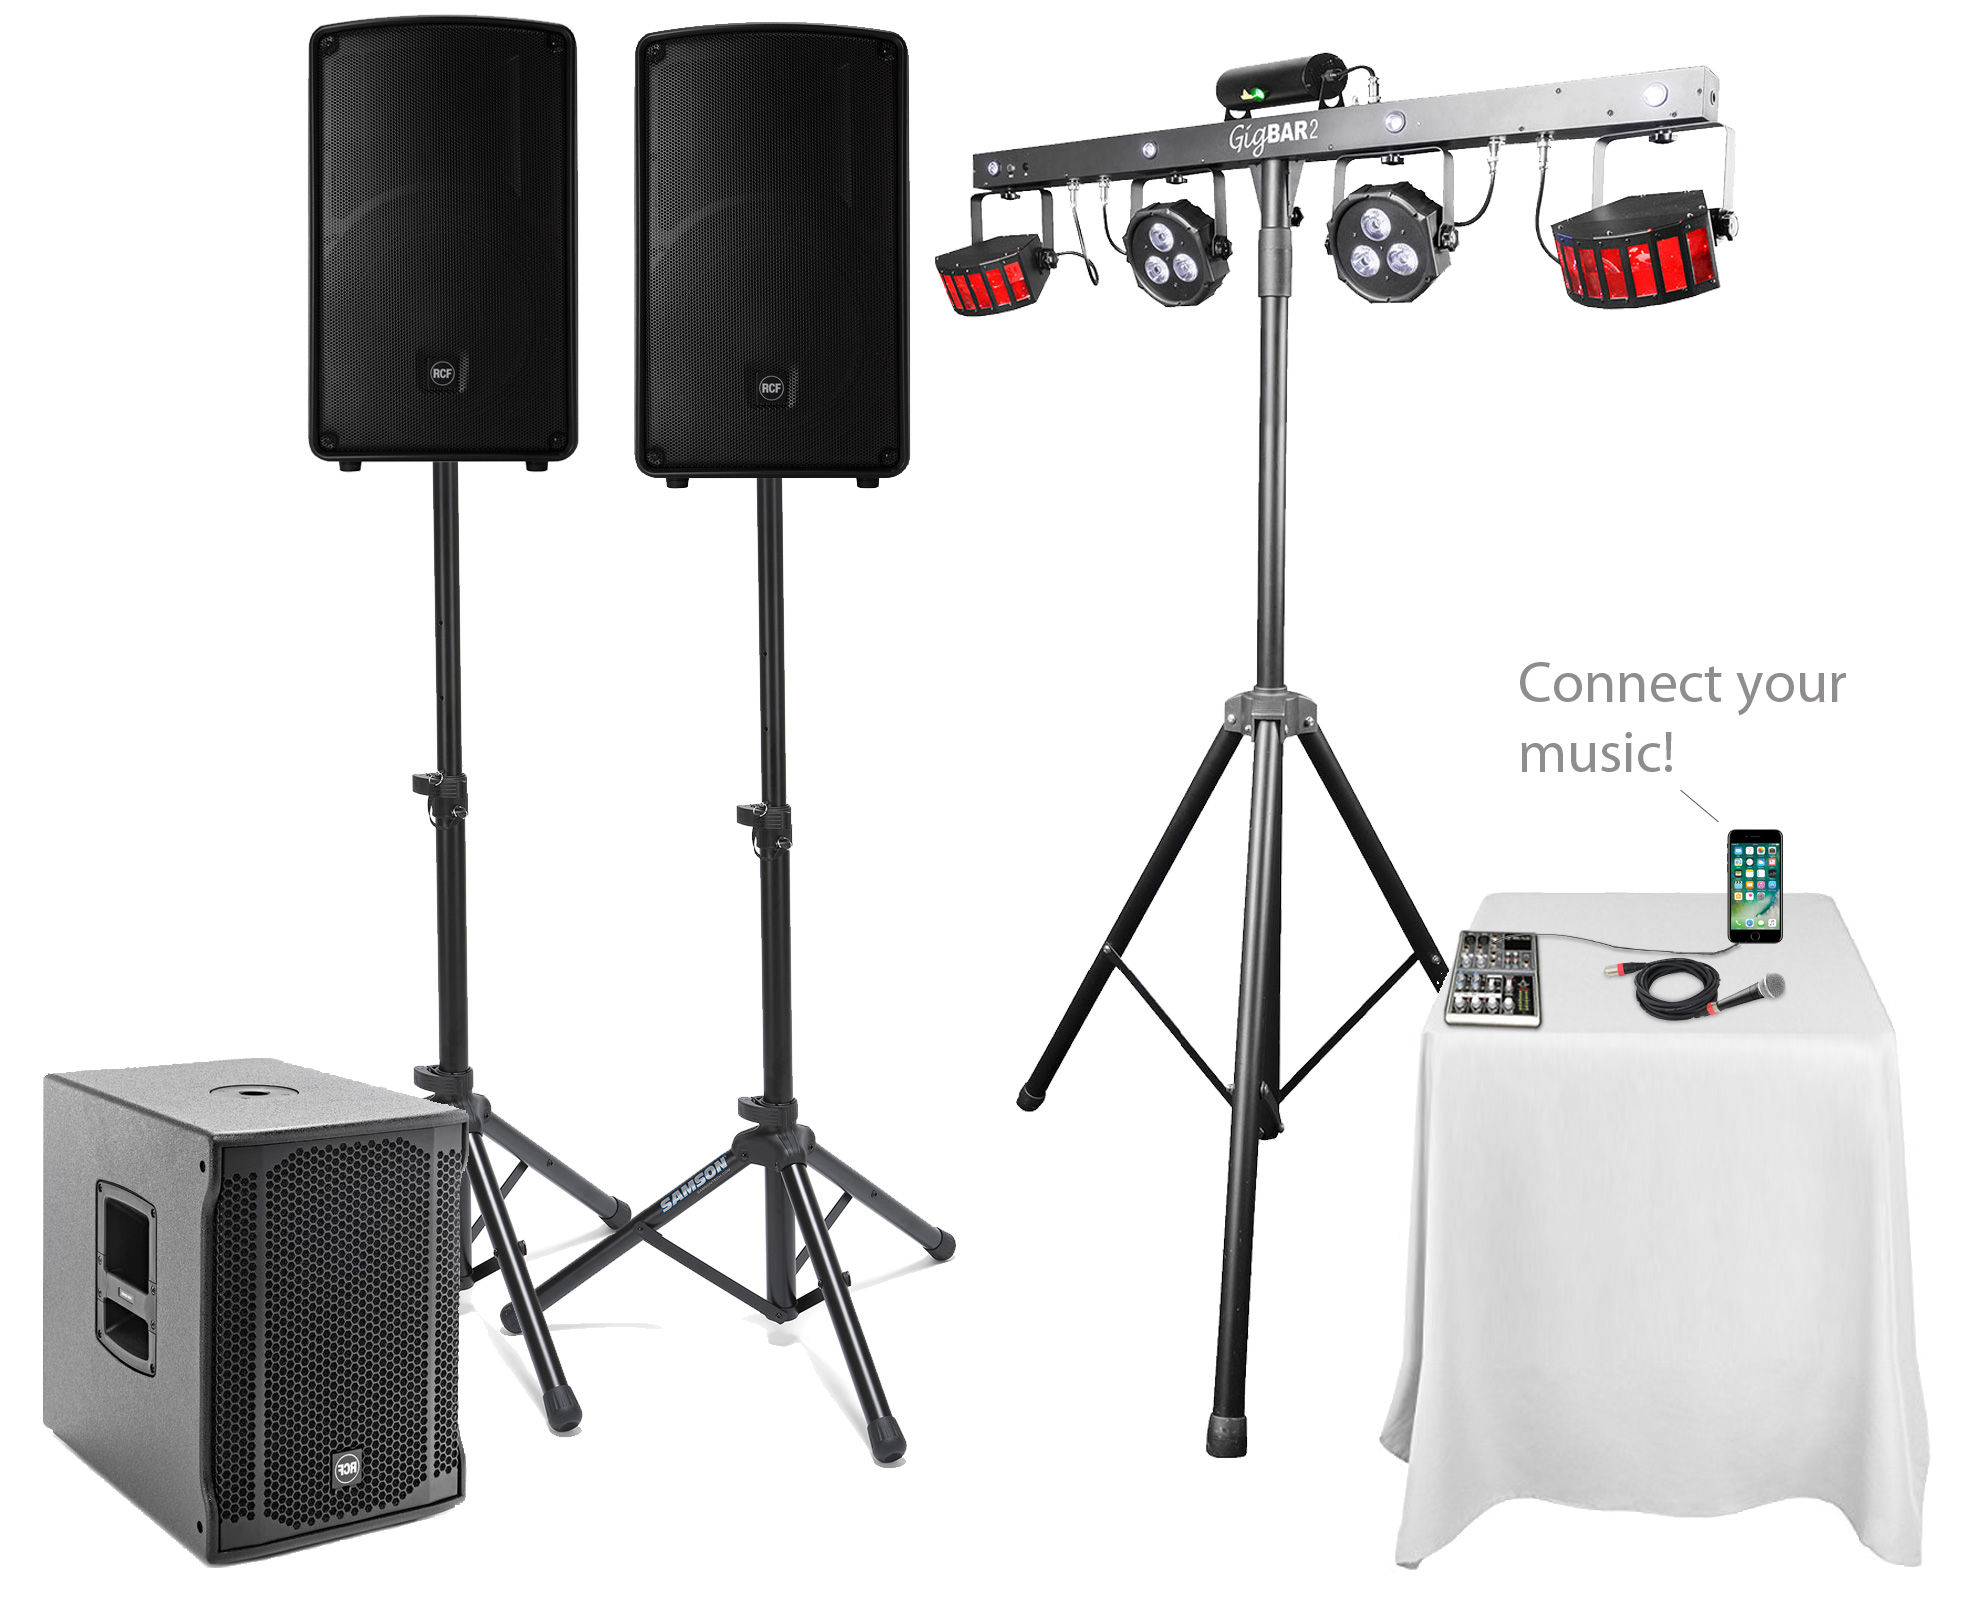 pa hire, sydney northern beaches - our pa system with lights for events of up to 300 guests